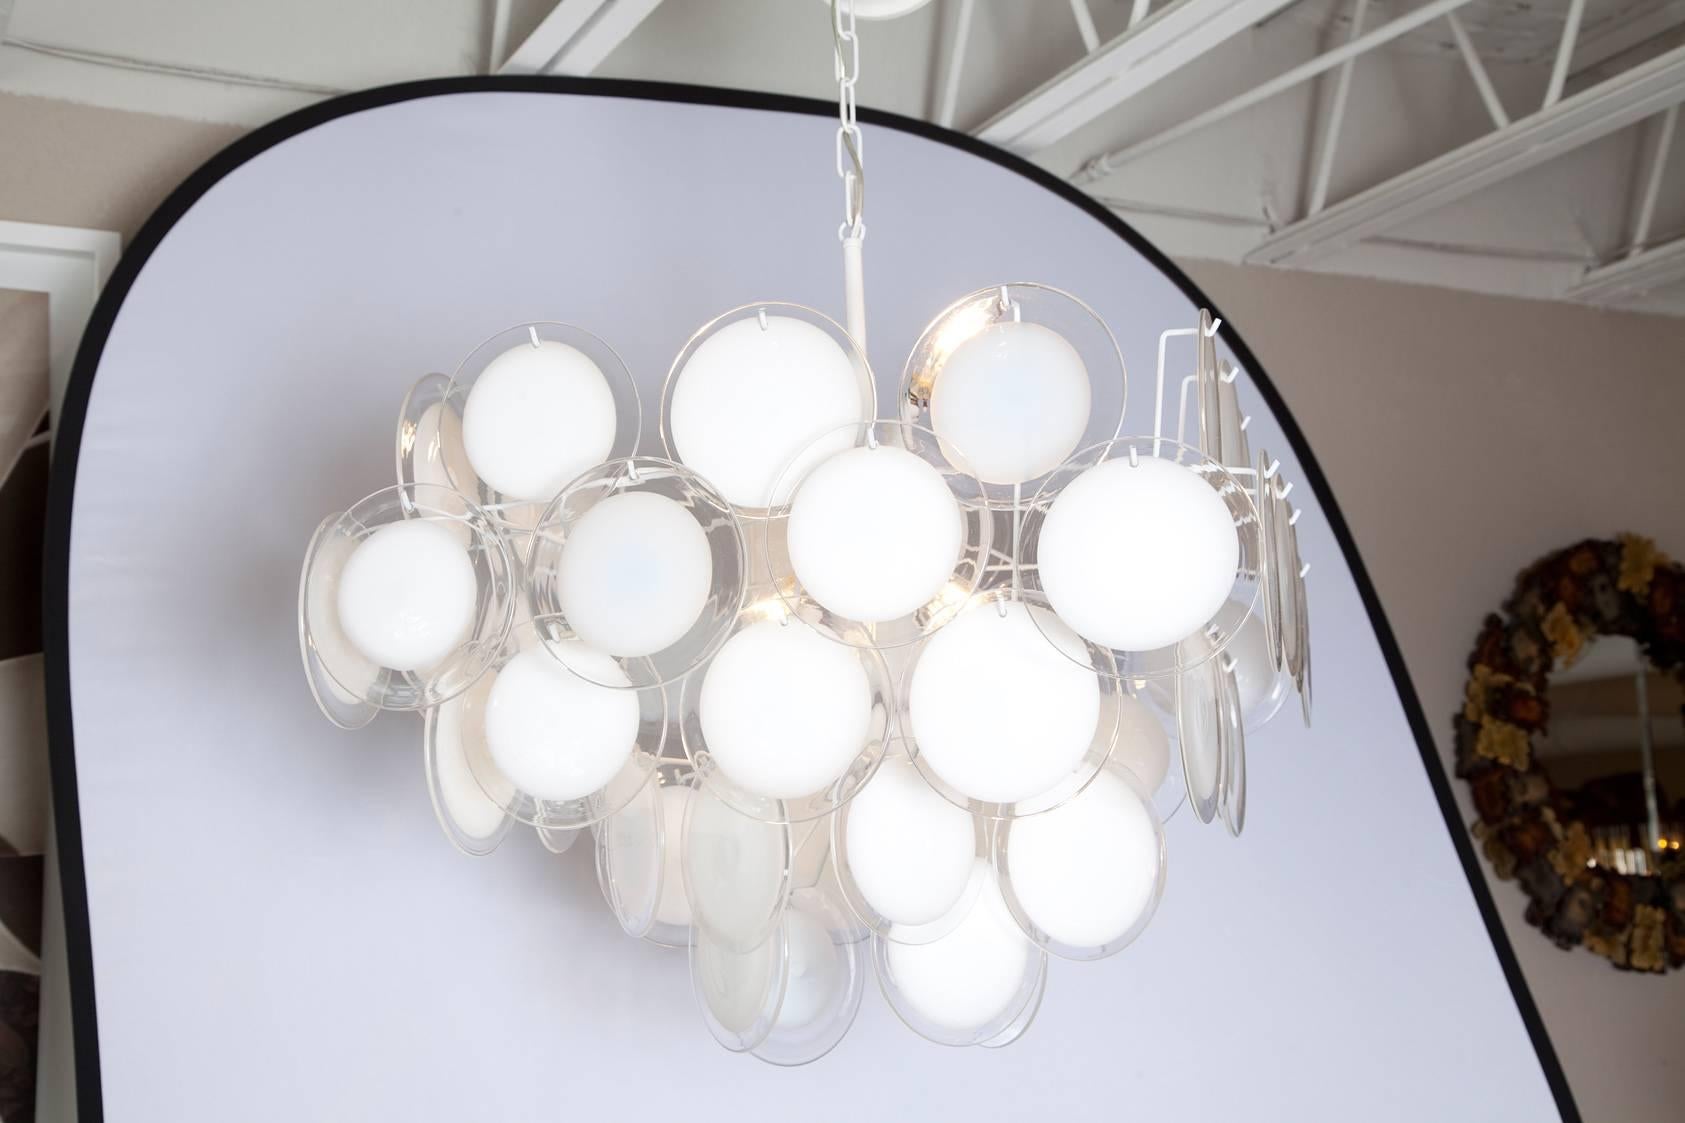 A fully restored, nicely scaled 1970s Vistosi chandelier with clear handblown Murano glass discs with white centres, hung on a newly re-wired, fresh white metal frame. Additional 18 inches of chain and canopy.